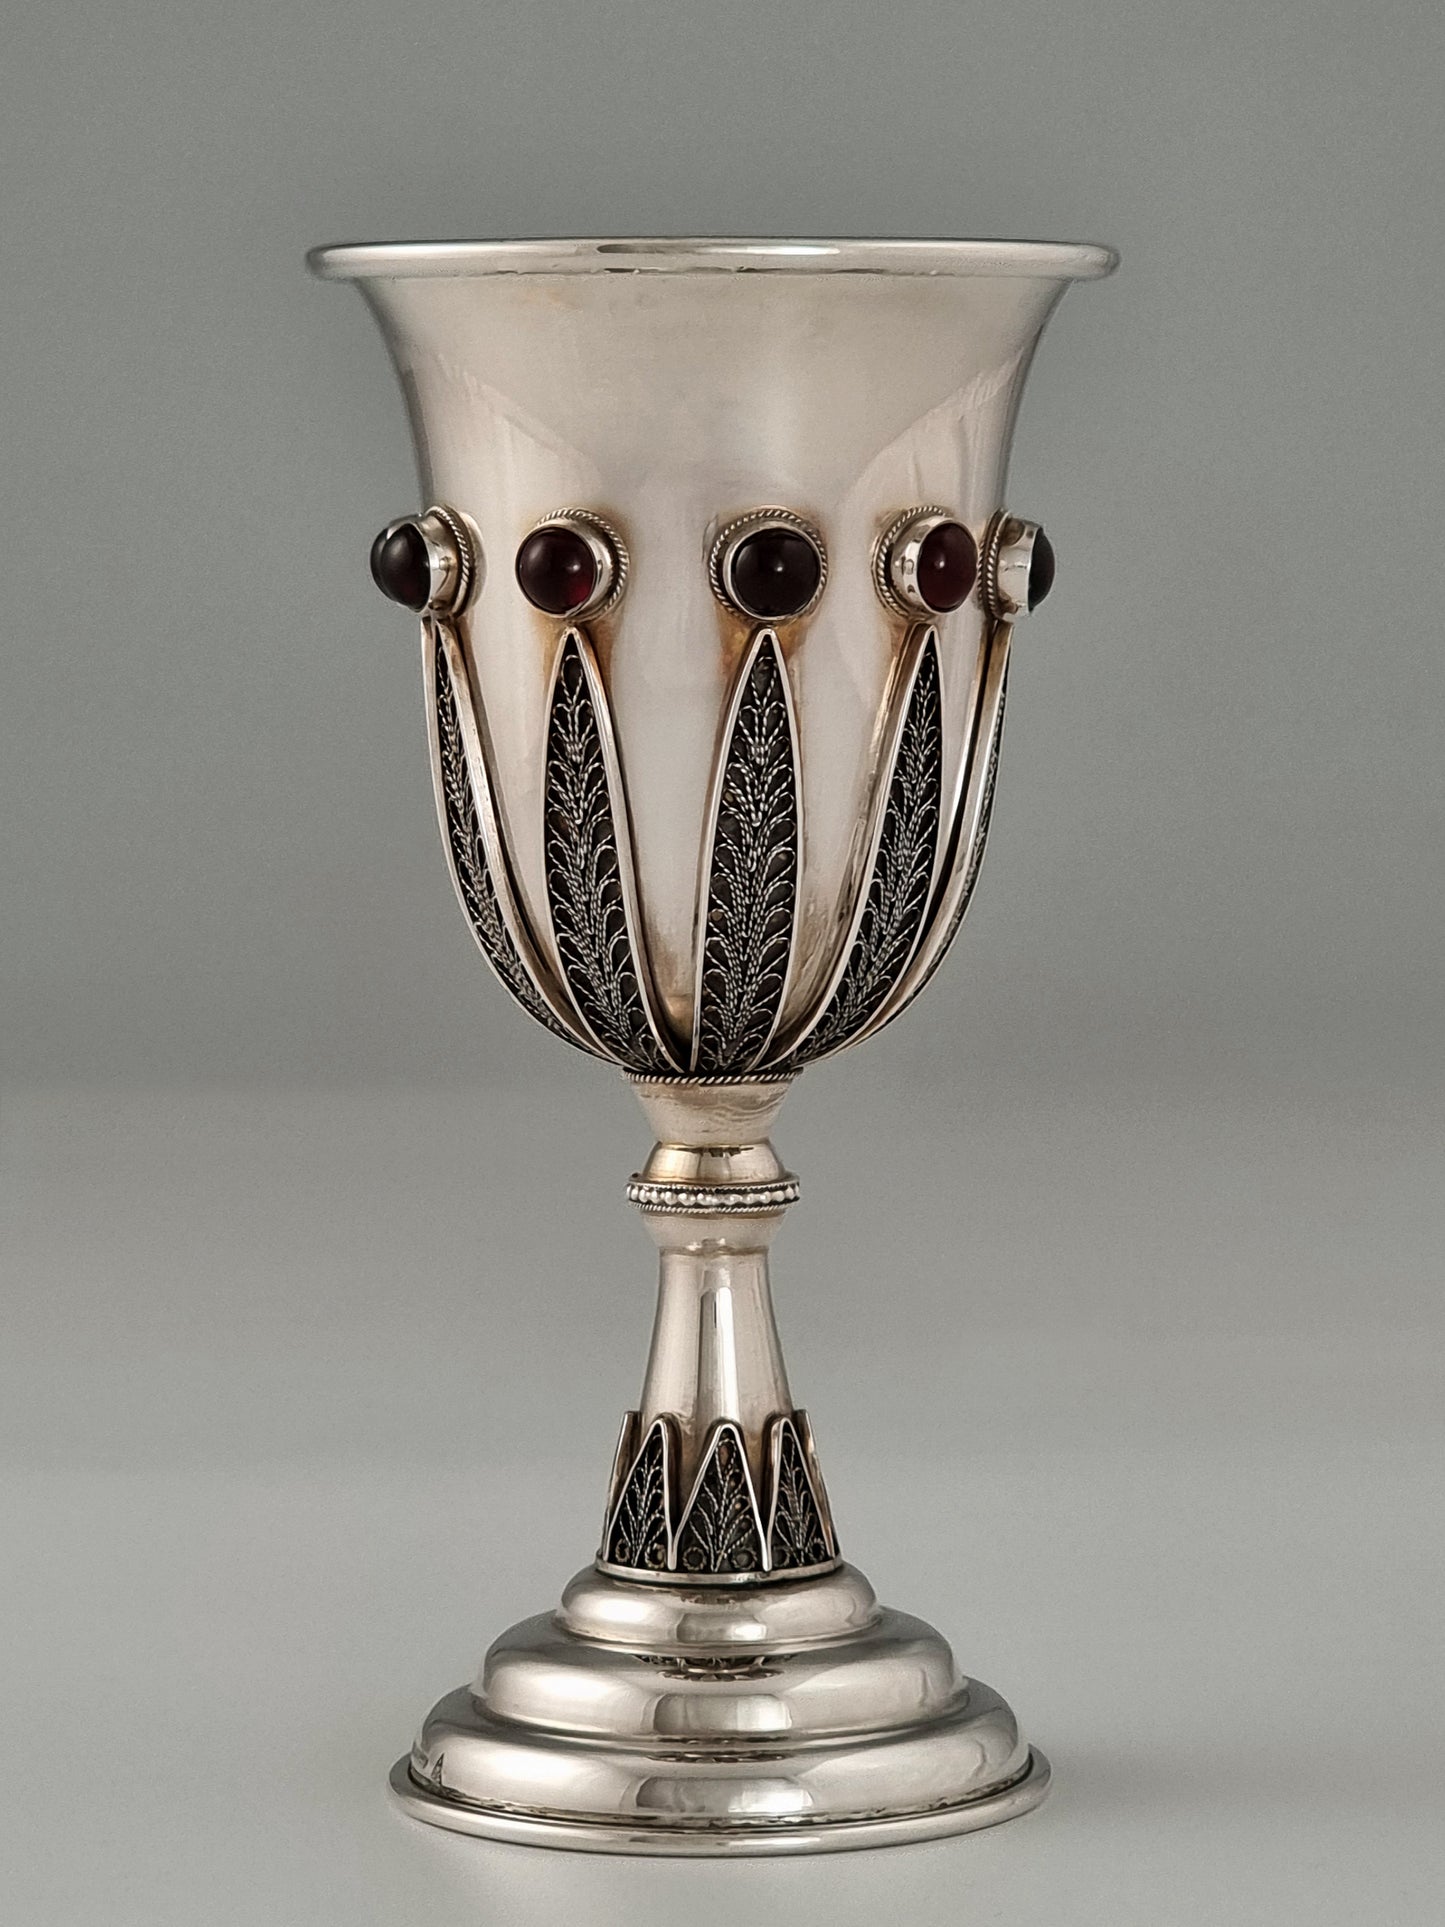 Jacob Kiddush Cup. This cup was designed in the 1960's. It is made of sterling silver, gold-plated silver on the inside, and adorned with ten garnet stones. It measures 5½" high.